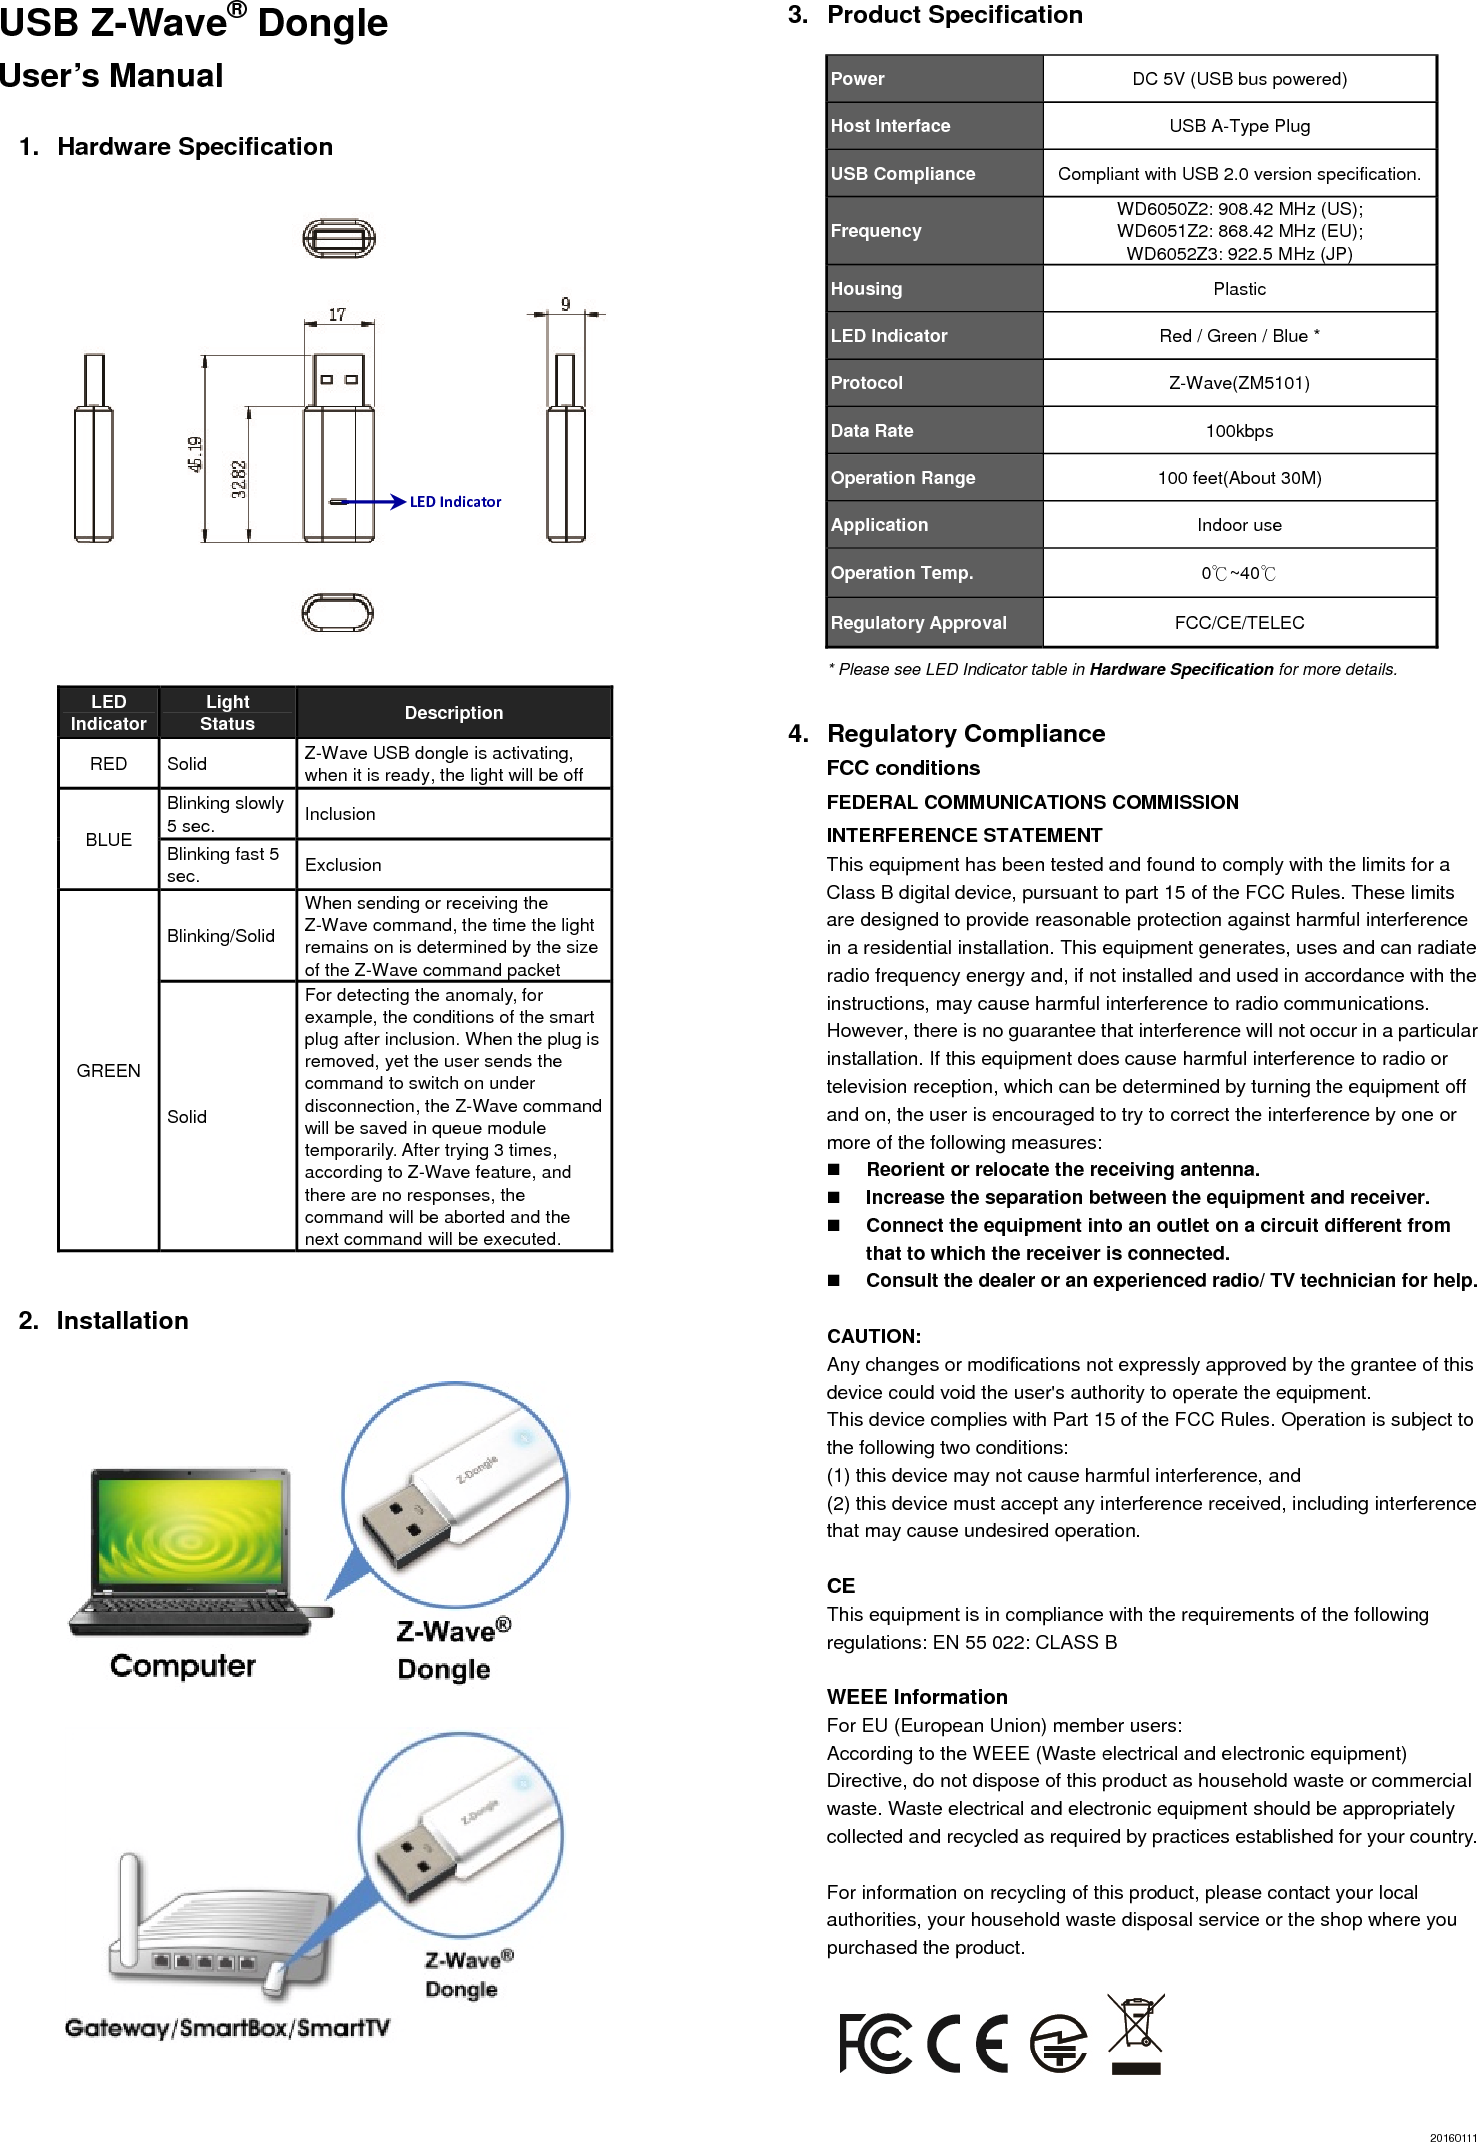 USB Z-Wave® Dongle   User’s Manual  1. Hardware Specification                 LED Indicator  Light Status  Description RED Solid  Z-Wave USB dongle is activating, when it is ready, the light will be off BLUE Blinking slowly 5 sec.  Inclusion Blinking fast 5 sec.  Exclusion GREEN Blinking/Solid When sending or receiving the Z-Wave command, the time the light remains on is determined by the size of the Z-Wave command packet Solid For detecting the anomaly, for example, the conditions of the smart plug after inclusion. When the plug is removed, yet the user sends the command to switch on under disconnection, the Z-Wave command will be saved in queue module temporarily. After trying 3 times, according to Z-Wave feature, and there are no responses, the command will be aborted and the next command will be executed.              2. Installation           3. Product Specification Power  DC 5V (USB bus powered) Host Interface    USB A-Type Plug USB Compliance  Compliant with USB 2.0 version specification. Frequency  WD6050Z2: 908.42 MHz (US);   WD6051Z2: 868.42 MHz (EU);   WD6052Z3: 922.5 MHz (JP) Housing  Plastic LED Indicator  Red / Green / Blue * Protocol  Z-Wave(ZM5101) Data Rate  100kbps Operation Range  100 feet(About 30M) Application  Indoor use Operation Temp.  0℃~40℃ Regulatory Approval  FCC/CE/TELEC * Please see LED Indicator table in Hardware Specification for more details.  4. Regulatory Compliance FCC conditions FEDERAL COMMUNICATIONS COMMISSION   INTERFERENCE STATEMENT  This equipment has been tested and found to comply with the limits for a Class B digital device, pursuant to part 15 of the FCC Rules. These limits are designed to provide reasonable protection against harmful interference in a residential installation. This equipment generates, uses and can radiate radio frequency energy and, if not installed and used in accordance with the instructions, may cause harmful interference to radio communications. However, there is no guarantee that interference will not occur in a particular installation. If this equipment does cause harmful interference to radio or television reception, which can be determined by turning the equipment off and on, the user is encouraged to try to correct the interference by one or more of the following measures:  Reorient or relocate the receiving antenna.  Increase the separation between the equipment and receiver.  Connect the equipment into an outlet on a circuit different from that to which the receiver is connected.  Consult the dealer or an experienced radio/ TV technician for help.  CAUTION:  Any changes or modifications not expressly approved by the grantee of this device could void the user&apos;s authority to operate the equipment.   This device complies with Part 15 of the FCC Rules. Operation is subject to the following two conditions:   (1) this device may not cause harmful interference, and   (2) this device must accept any interference received, including interference that may cause undesired operation.  CE This equipment is in compliance with the requirements of the following regulations: EN 55 022: CLASS B  WEEE Information For EU (European Union) member users:   According to the WEEE (Waste electrical and electronic equipment) Directive, do not dispose of this product as household waste or commercial waste. Waste electrical and electronic equipment should be appropriately collected and recycled as required by practices established for your country.    For information on recycling of this product, please contact your local authorities, your household waste disposal service or the shop where you purchased the product.      20160111 LEDIndicator